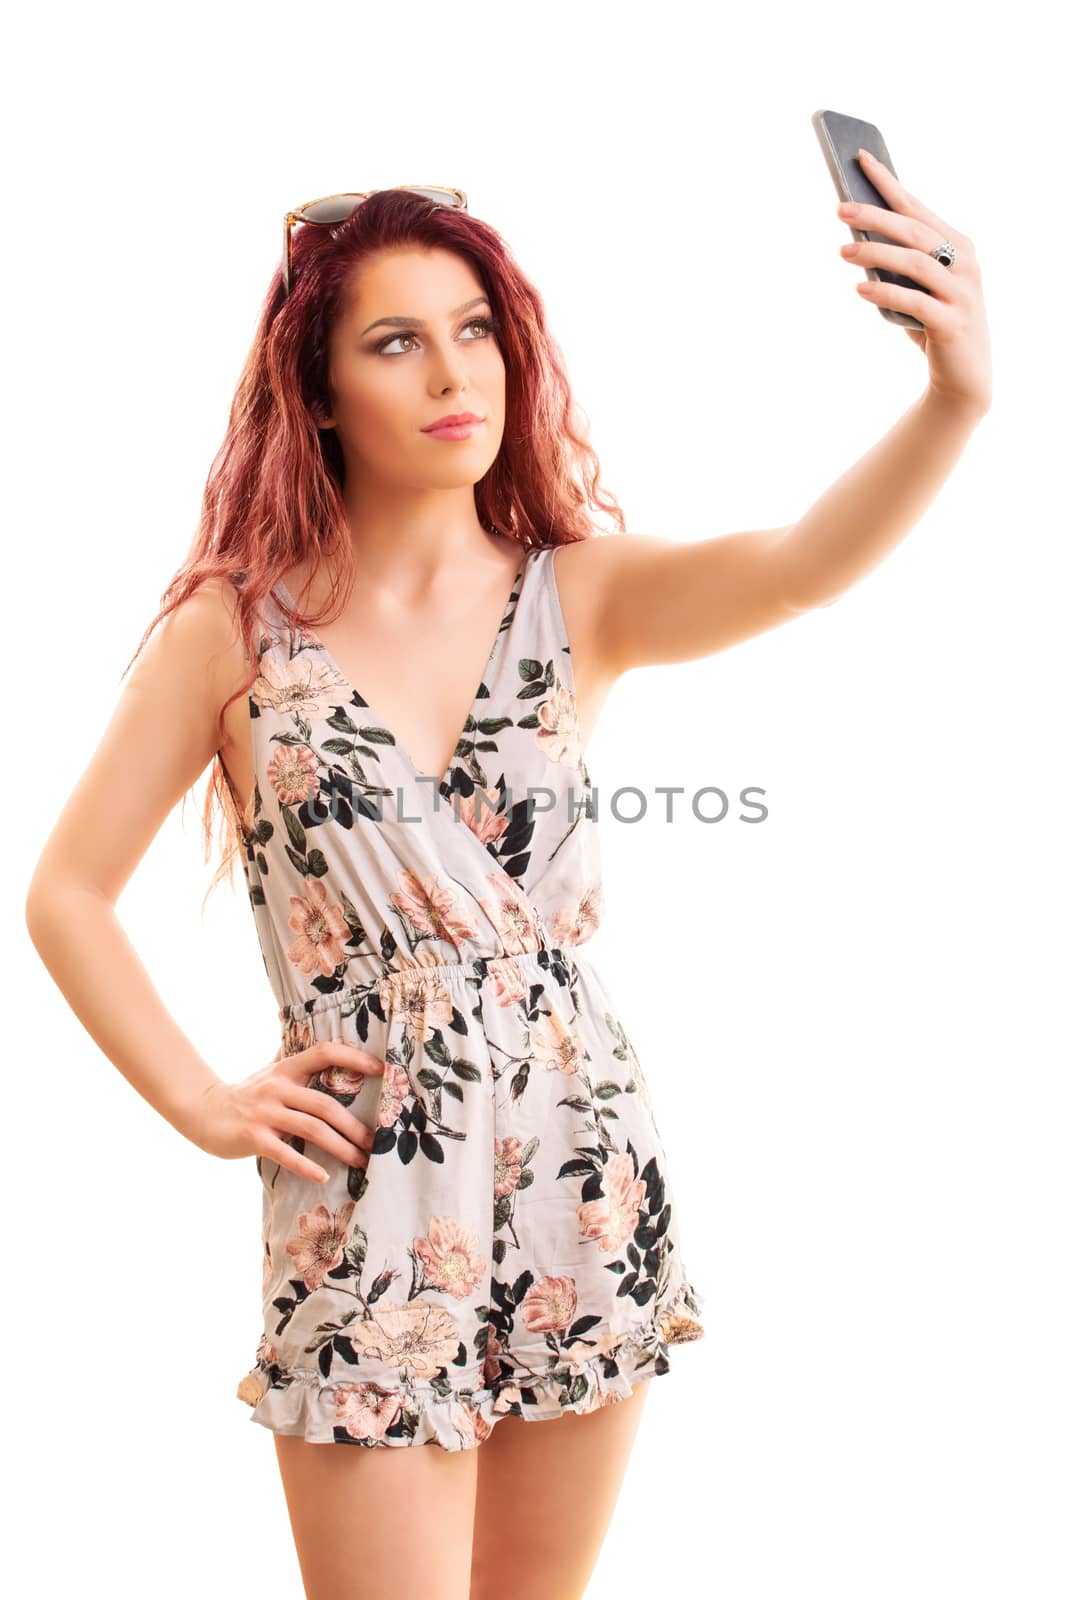 Beautiful smiling fashionable young girl taking a selfie, isolated on a white background.

